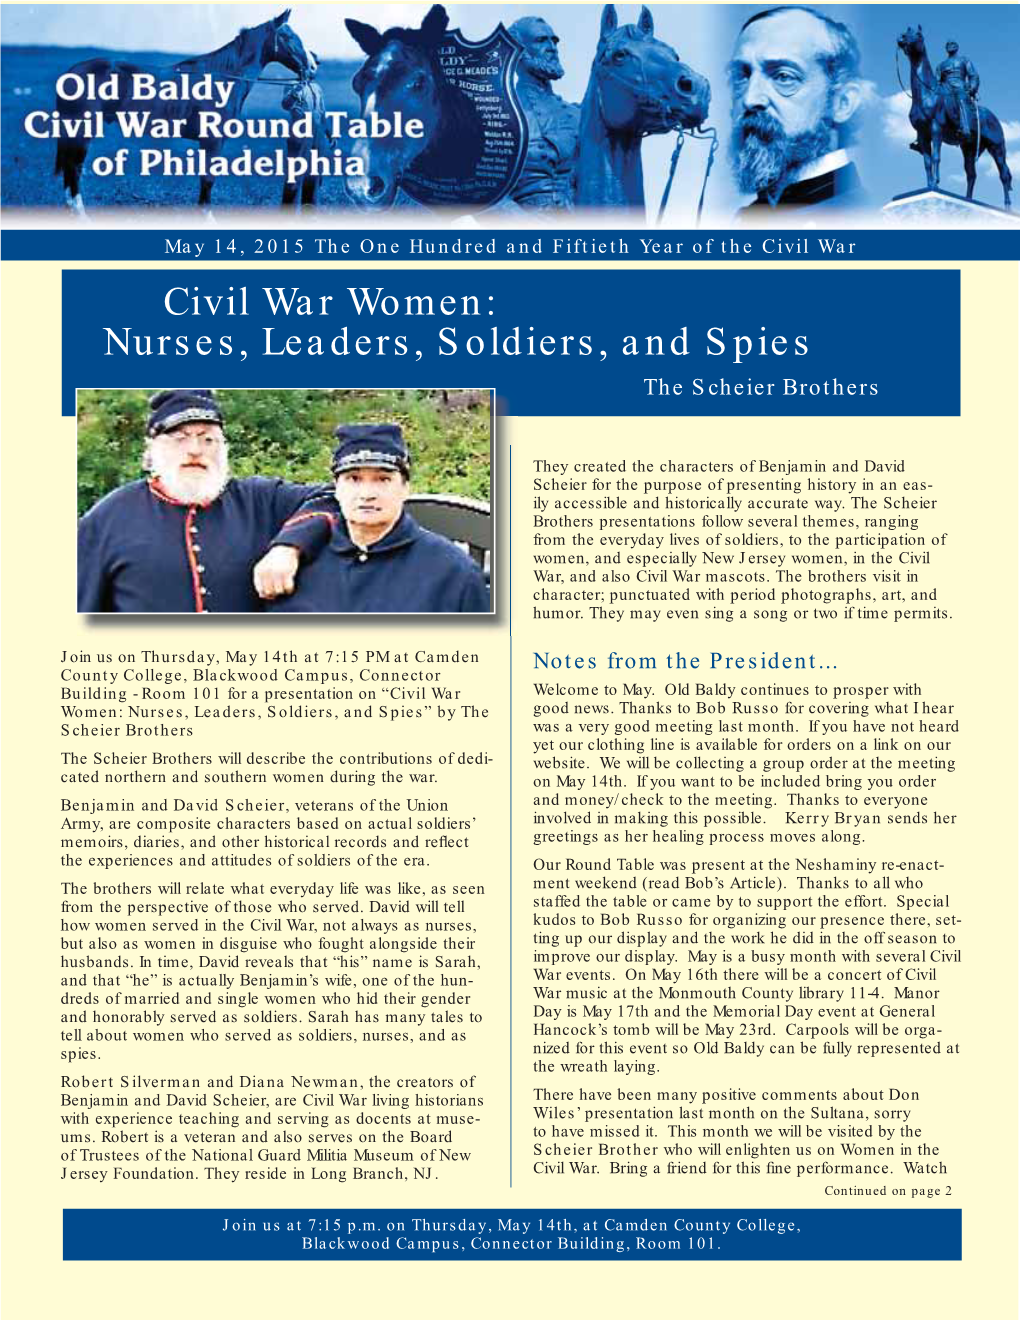 Civil War Women: Nurses, Leaders, Soldiers, and Spies the Scheier Brothers